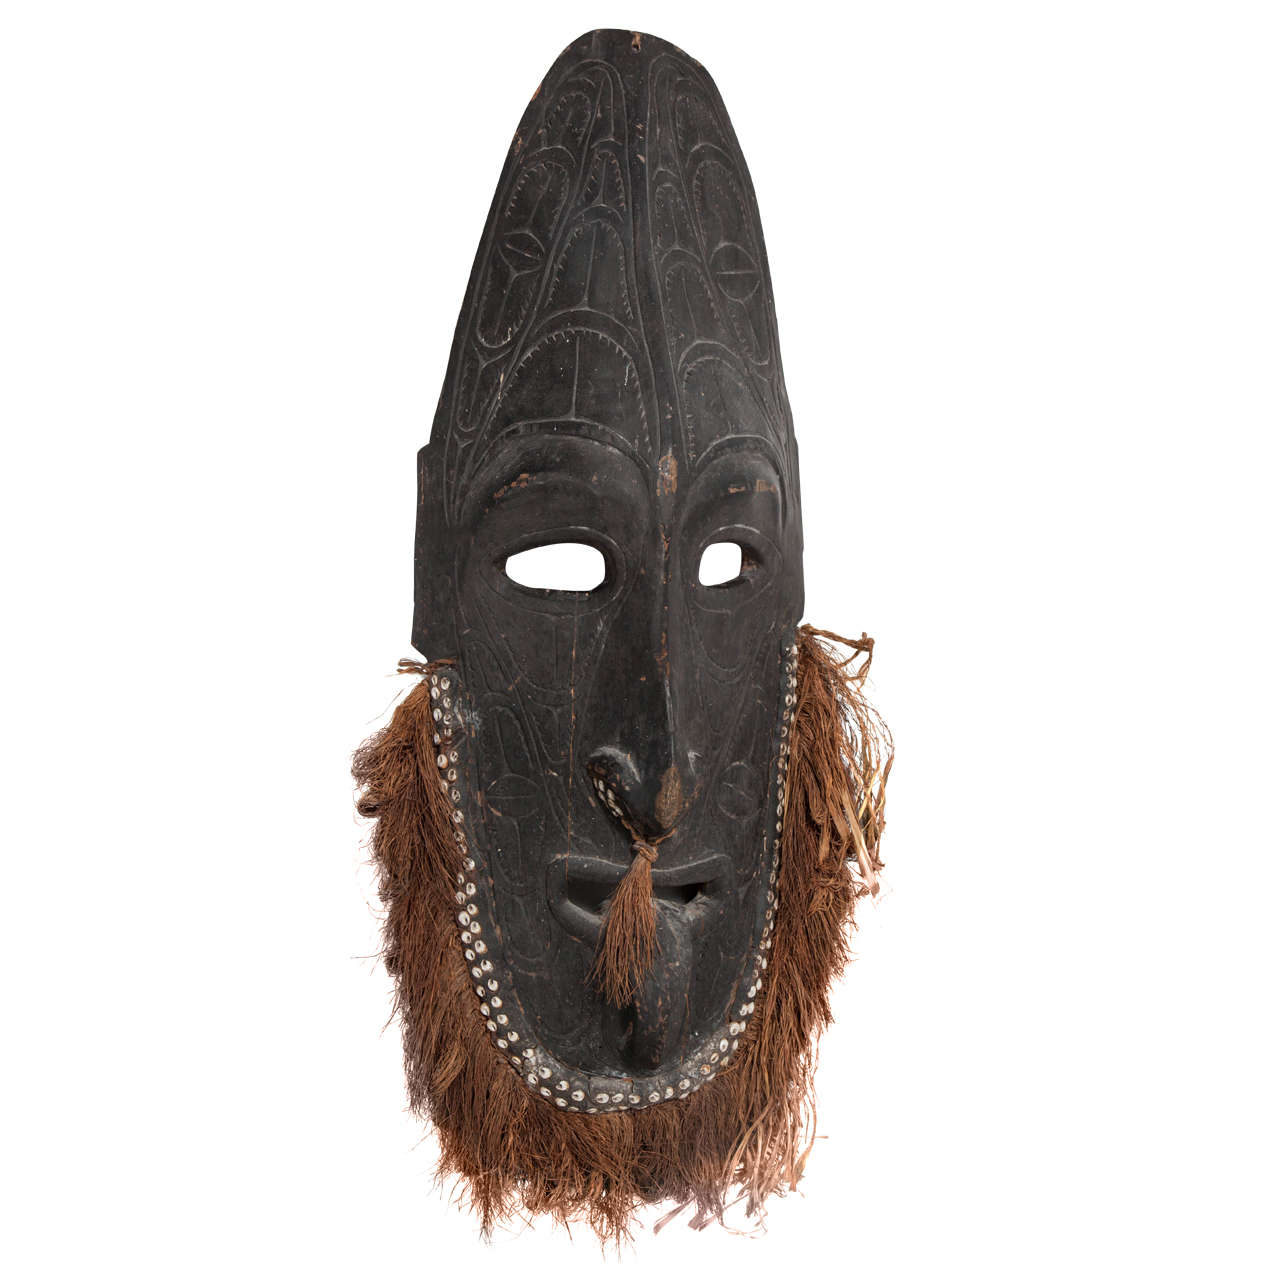 Decorative Objects in the Style of Sepik River Mask from Papua New Guinea